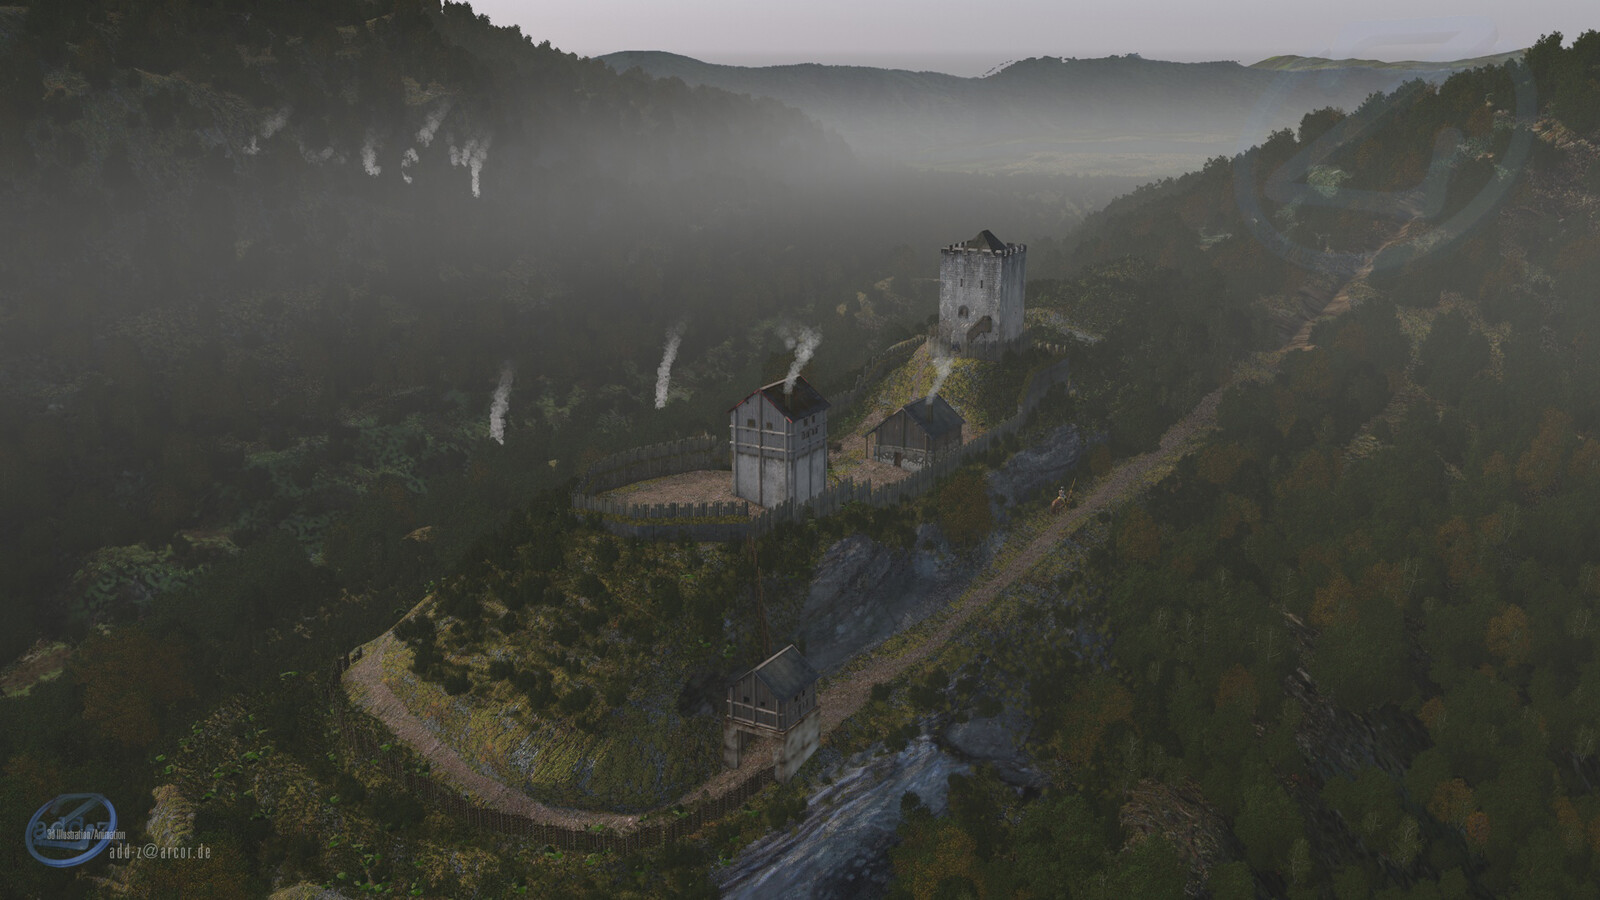 The castle above the Brexbachtal with the plumes of smoke from the iron smelting. The Rhine Valley can be seen in the far background.